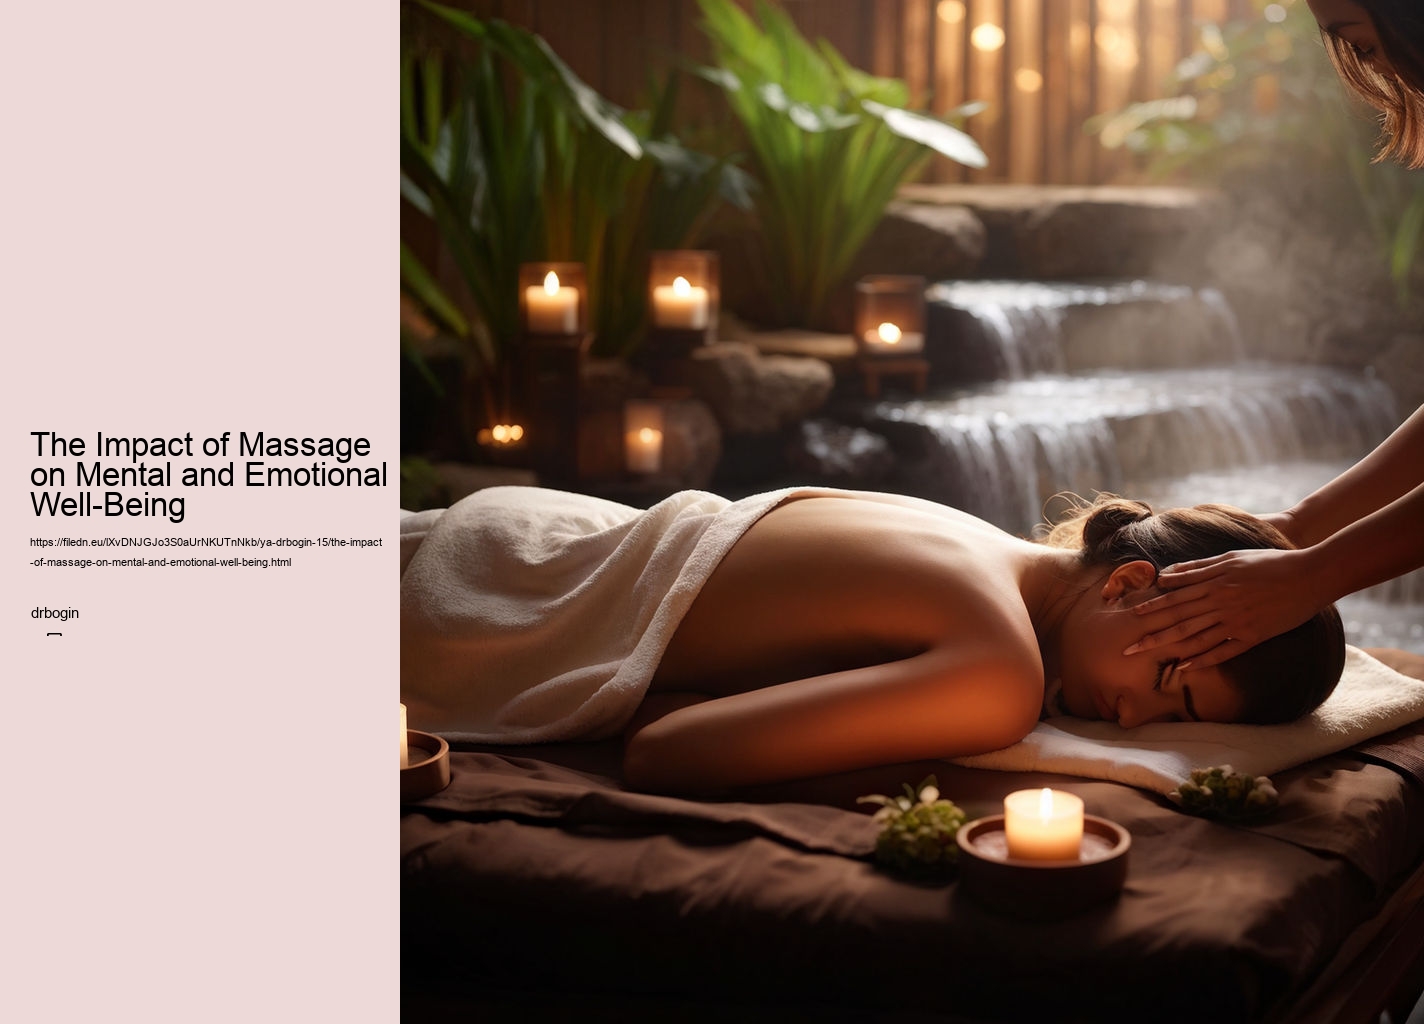 The Impact of Massage on Mental and Emotional Well-Being